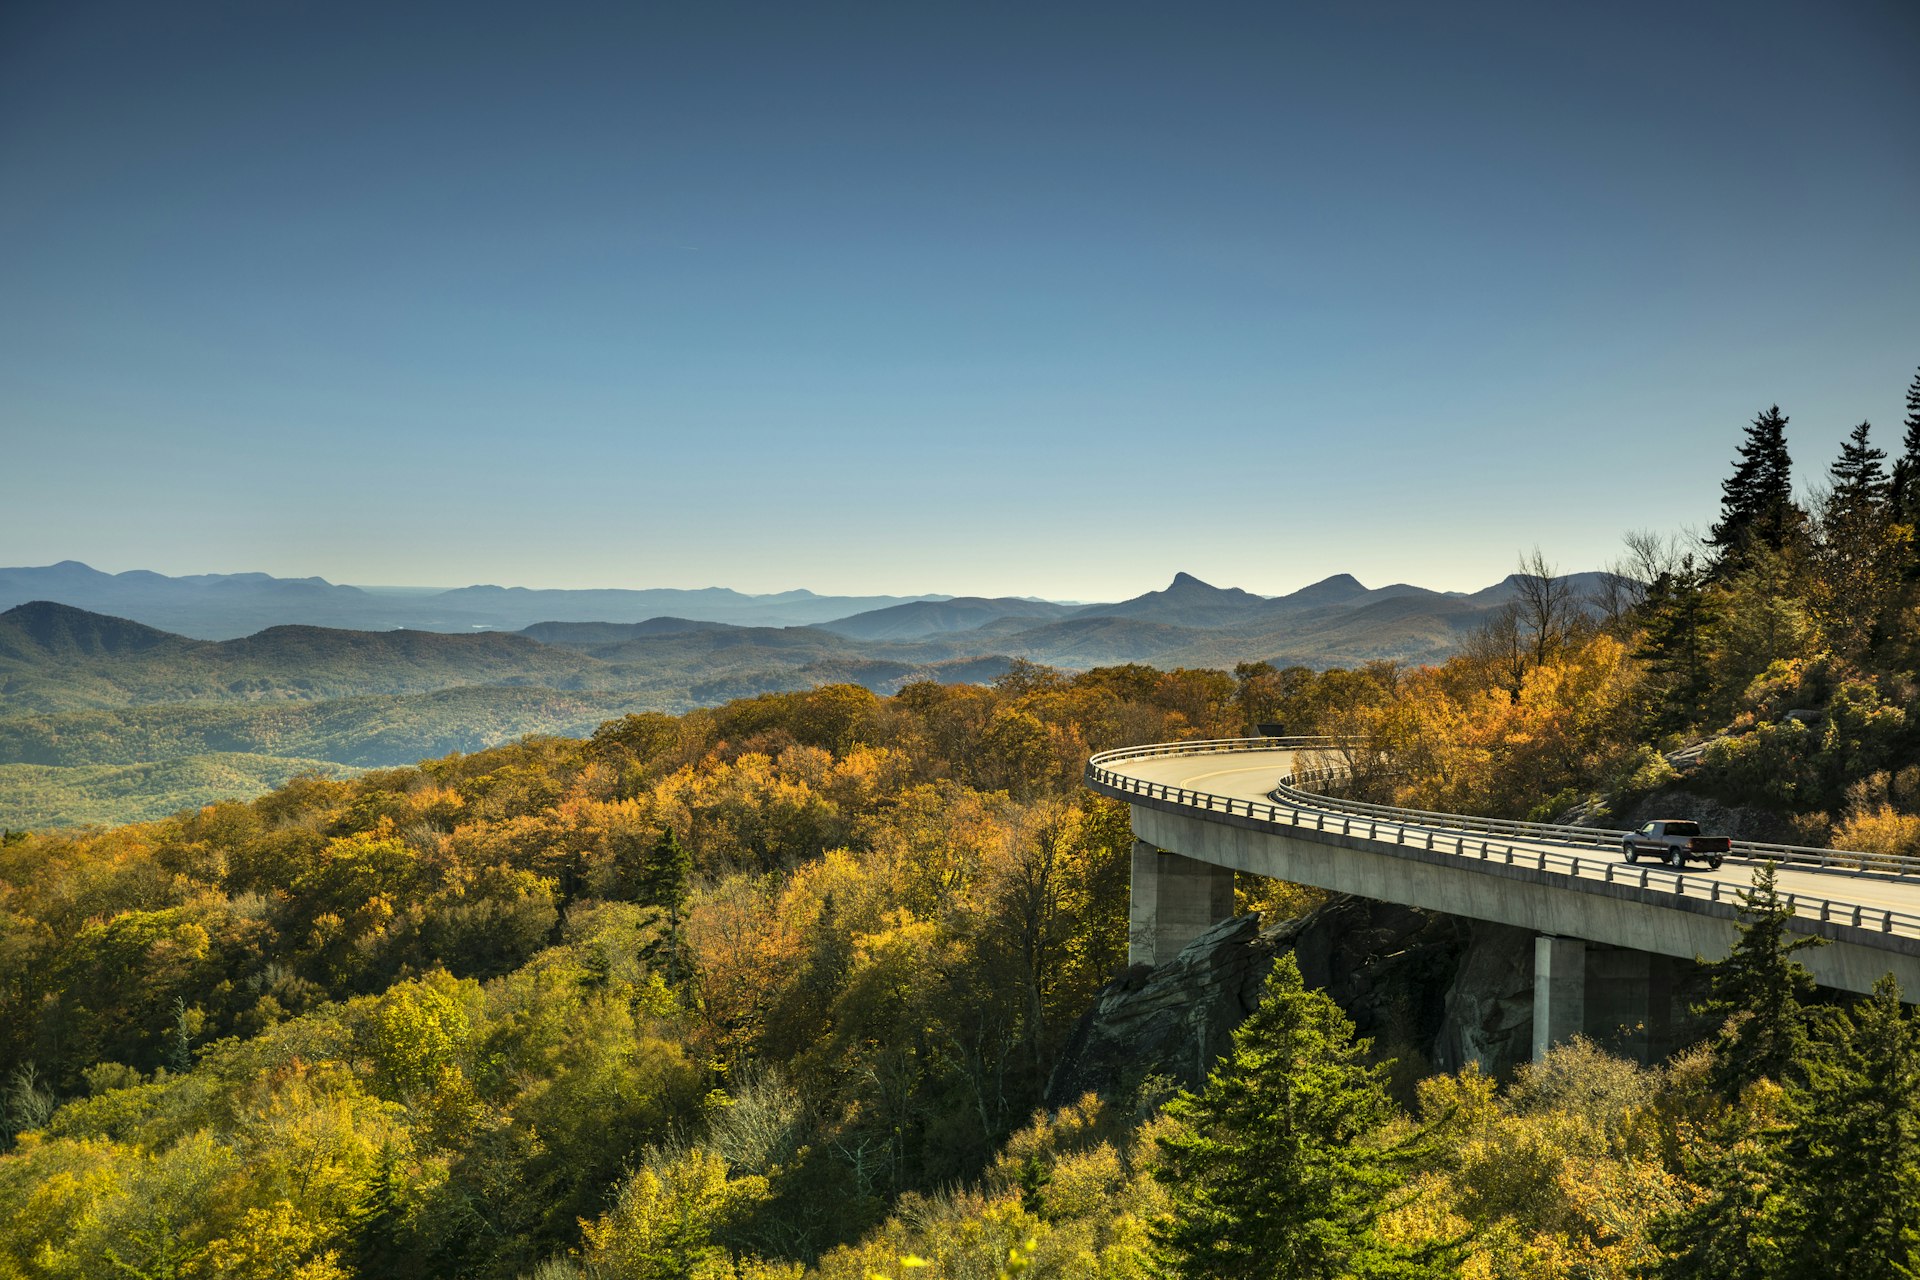 Cars travel on the Linn Cove Viaduct highway road on the Grandfather Mountain along the Blue Ridge Parkway in autumn North Carolina